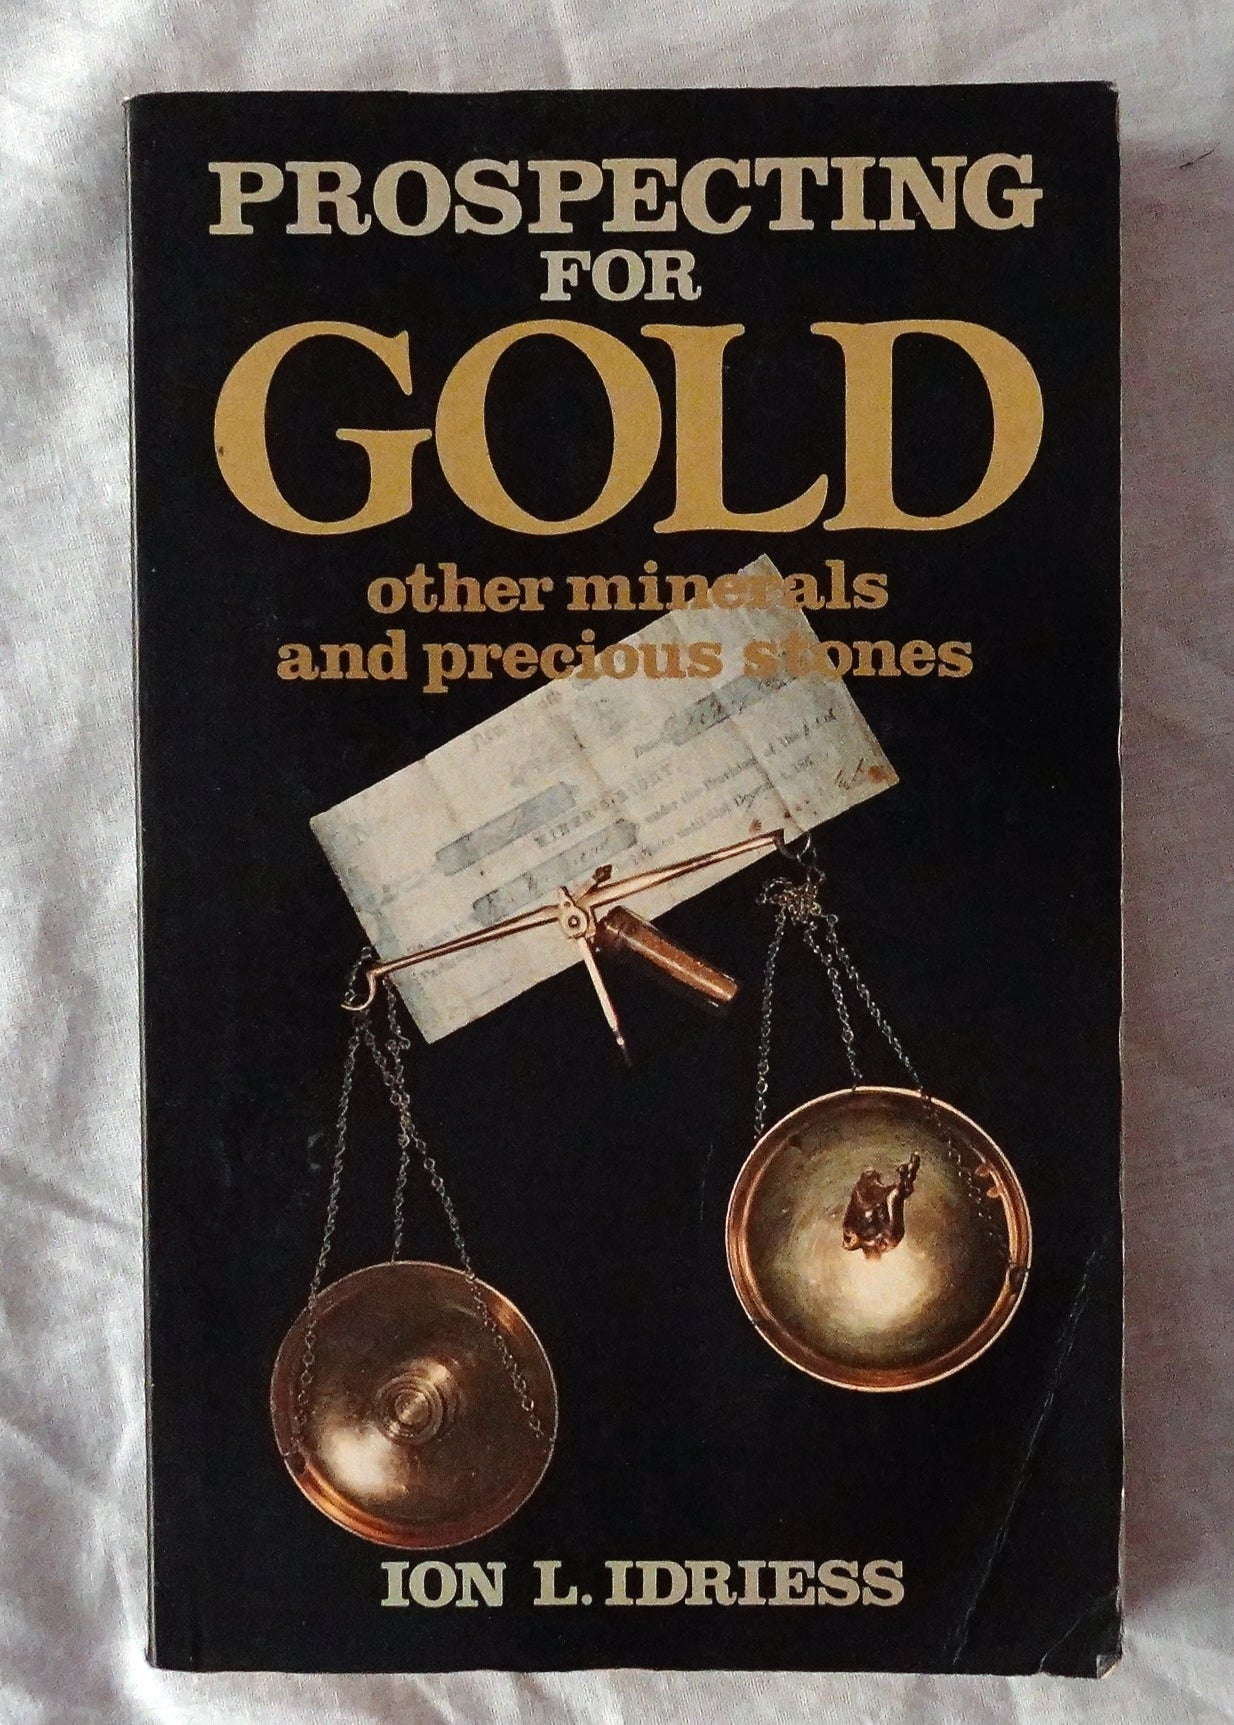 Prospecting For Gold  Other Minerals and Precious Stones  by Ion L. Idriess